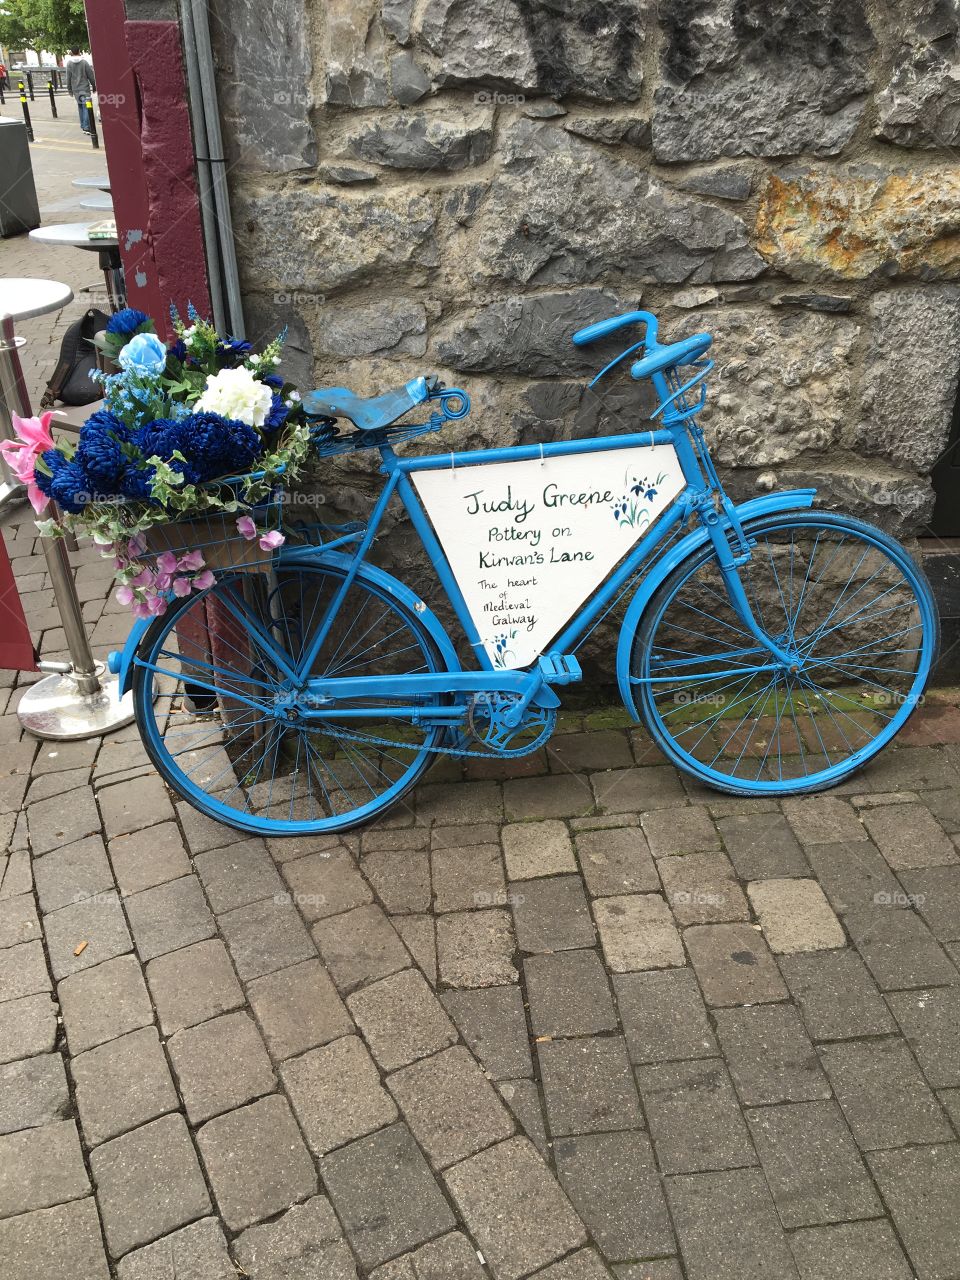 Bicycle store sign in Galway, Ireland